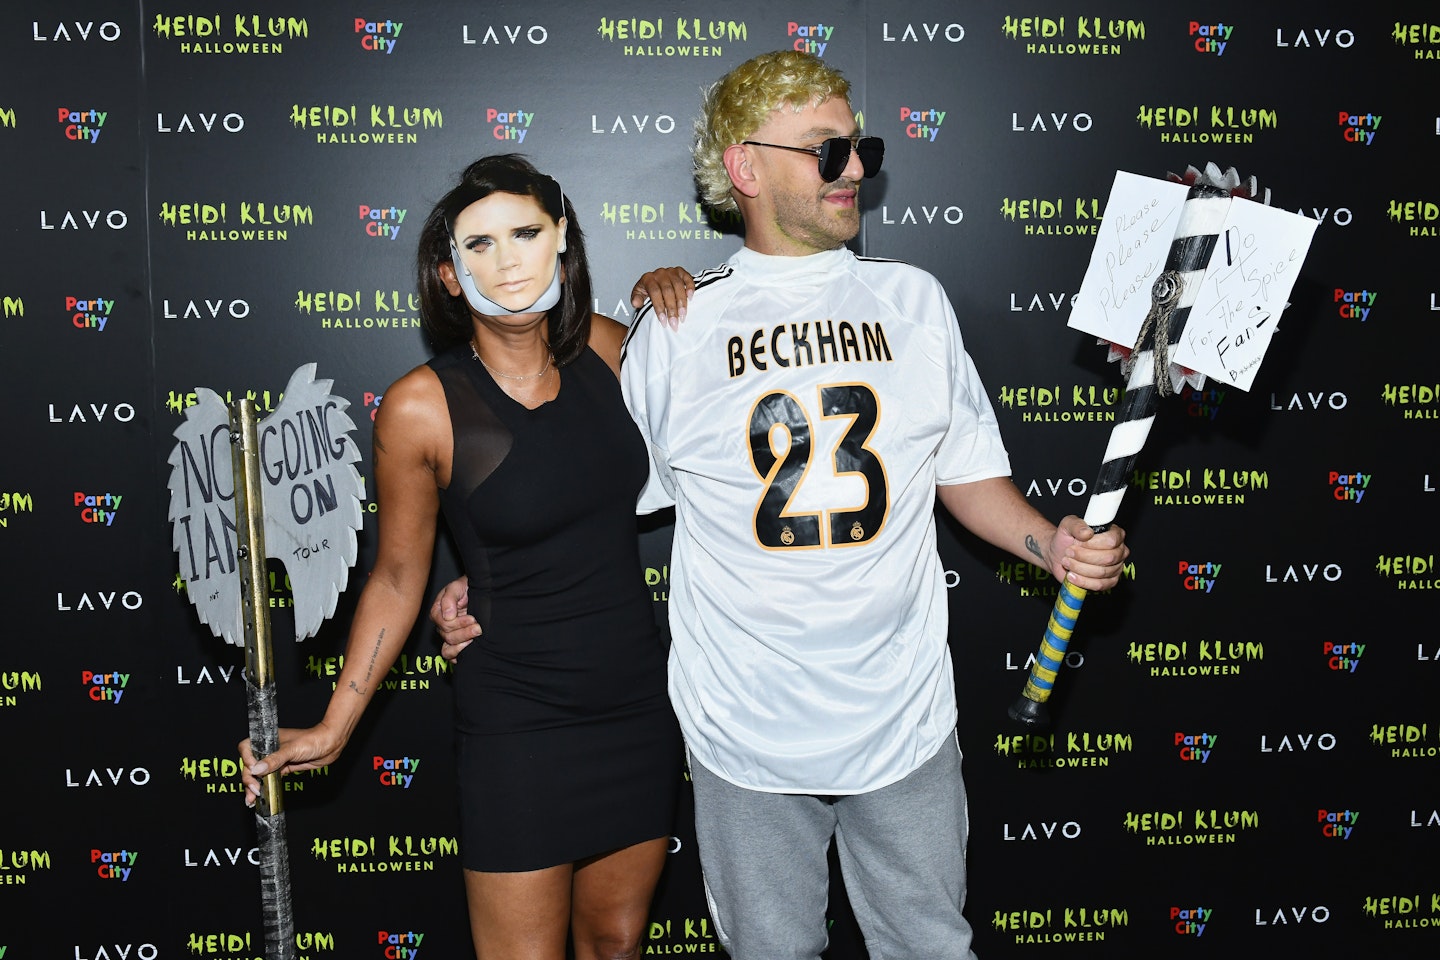 Mel B dressed as Victoria Beckham and Gary Madatyan dressed as David Beckham and Heidi Klum's Halloween party